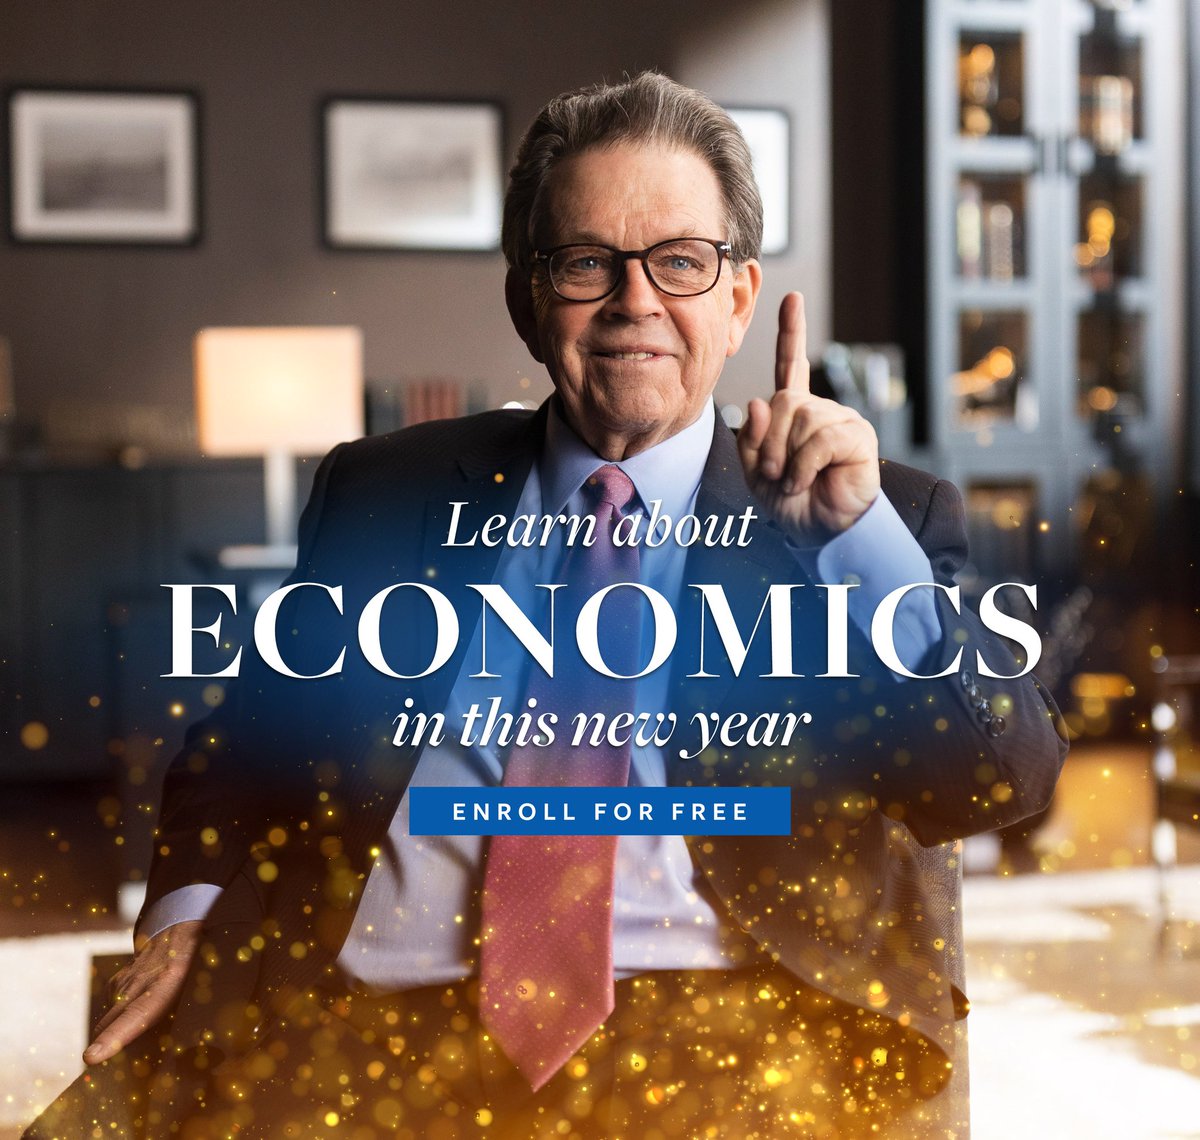 NEW YEAR'S RESOLUTION | Resolve to learn economics this year! @BetzArthur, @SteveForbesCEO, @StephenMoore, @larry_kudlow, @AmityShlaes, @BrianDomitrovic and Larry Arnn answer questions about taxation, regulation, money, spending, and trade. Start for FREE: bit.ly/47aoxb6